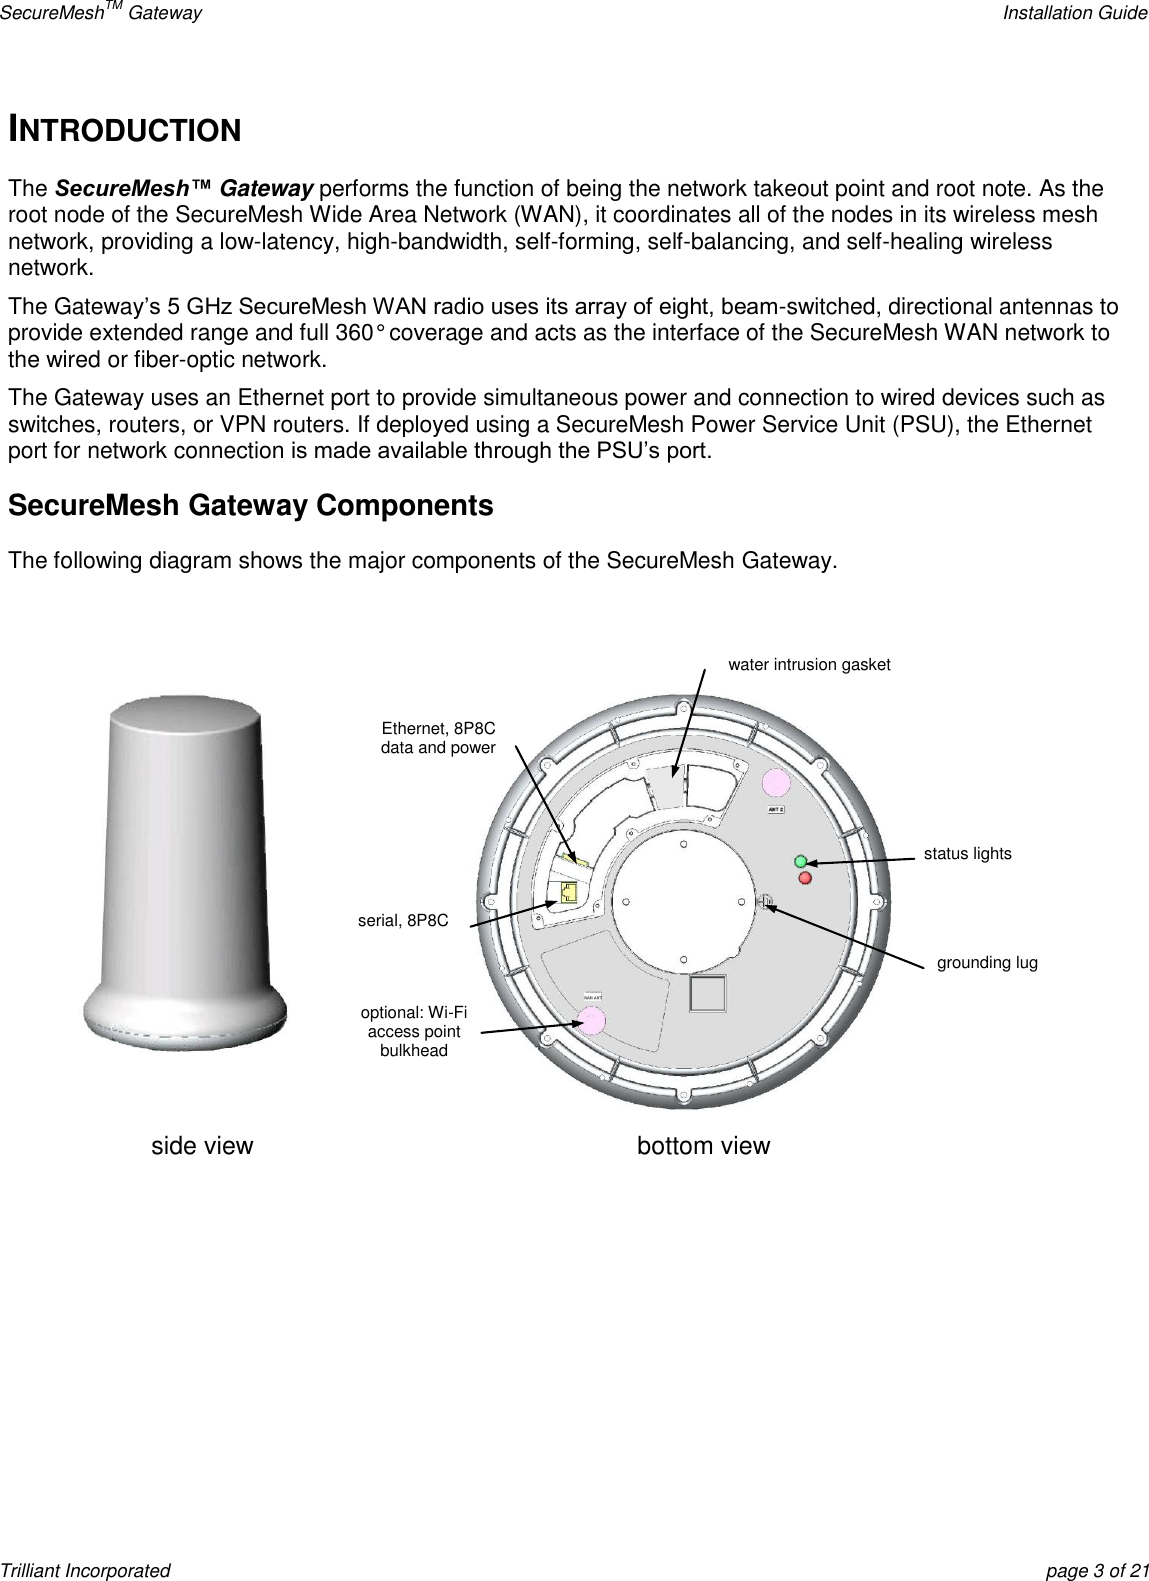 SecureMeshTM Gateway    Installation Guide Trilliant Incorporated  page 3 of 21 INTRODUCTION The SecureMesh™ Gateway performs the function of being the network takeout point and root note. As the root node of the SecureMesh Wide Area Network (WAN), it coordinates all of the nodes in its wireless mesh network, providing a low-latency, high-bandwidth, self-forming, self-balancing, and self-healing wireless network.  The Gateway’s 5 GHz SecureMesh WAN radio uses its array of eight, beam-switched, directional antennas to provide extended range and full 360° coverage and acts as the interface of the SecureMesh WAN network to the wired or fiber-optic network. The Gateway uses an Ethernet port to provide simultaneous power and connection to wired devices such as switches, routers, or VPN routers. If deployed using a SecureMesh Power Service Unit (PSU), the Ethernet port for network connection is made available through the PSU’s port.  SecureMesh Gateway Components The following diagram shows the major components of the SecureMesh Gateway.   side view bottom view Ethernet, 8P8C data and power serial, 8P8C optional: Wi-Fi access point bulkhead connector  water intrusion gasket status lights grounding lug 